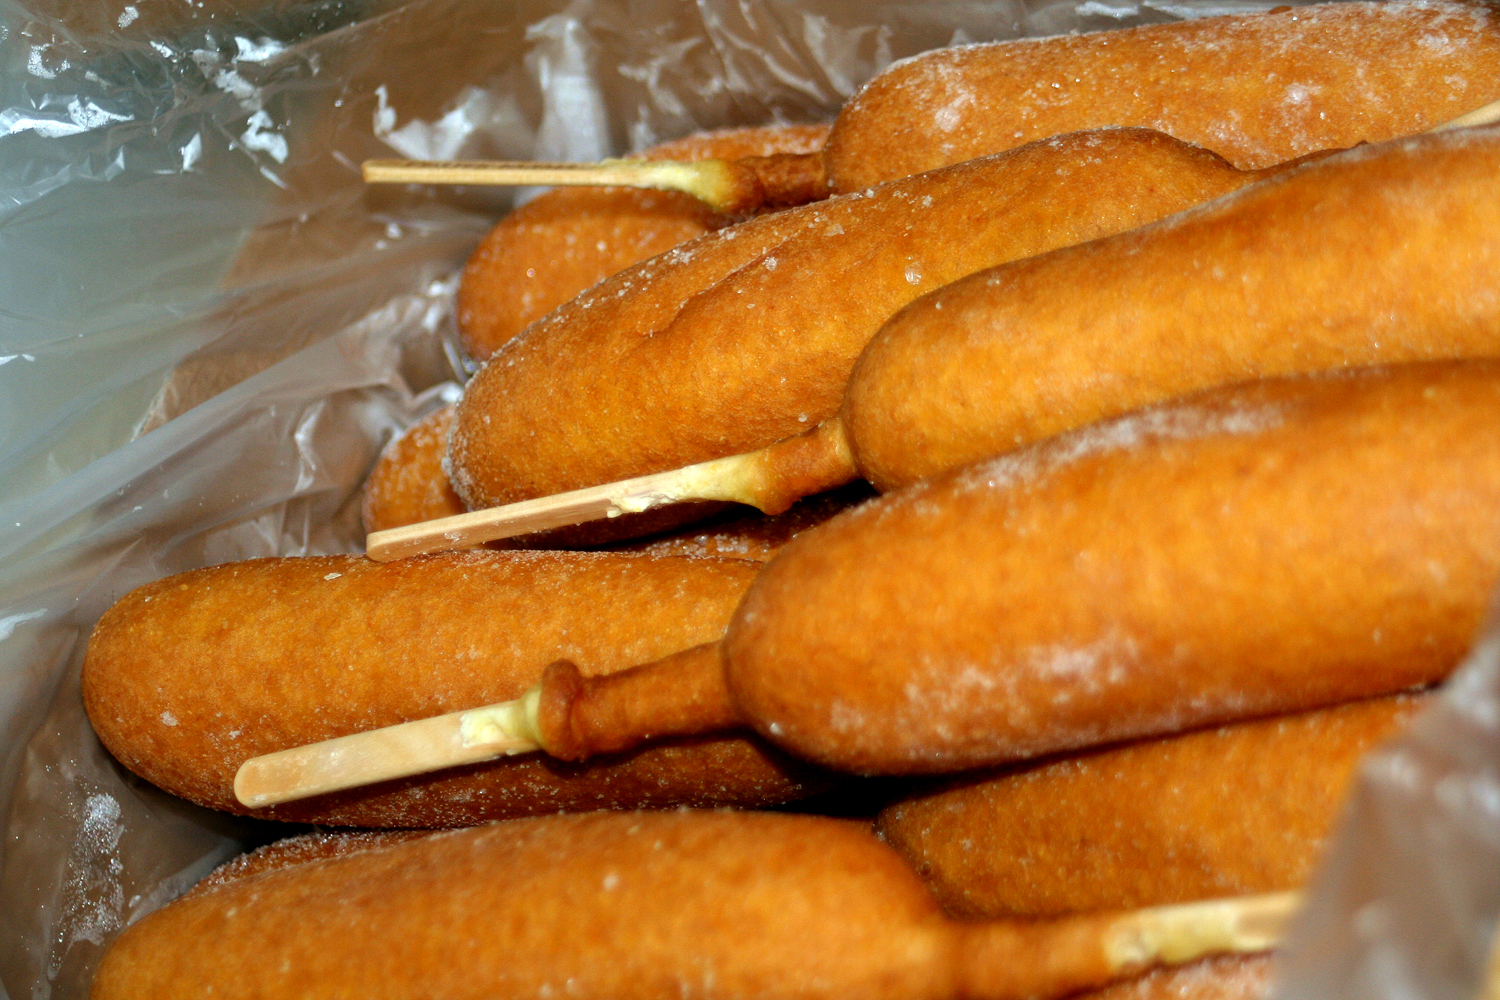 there are some donuts that have been skewered with toothpicks